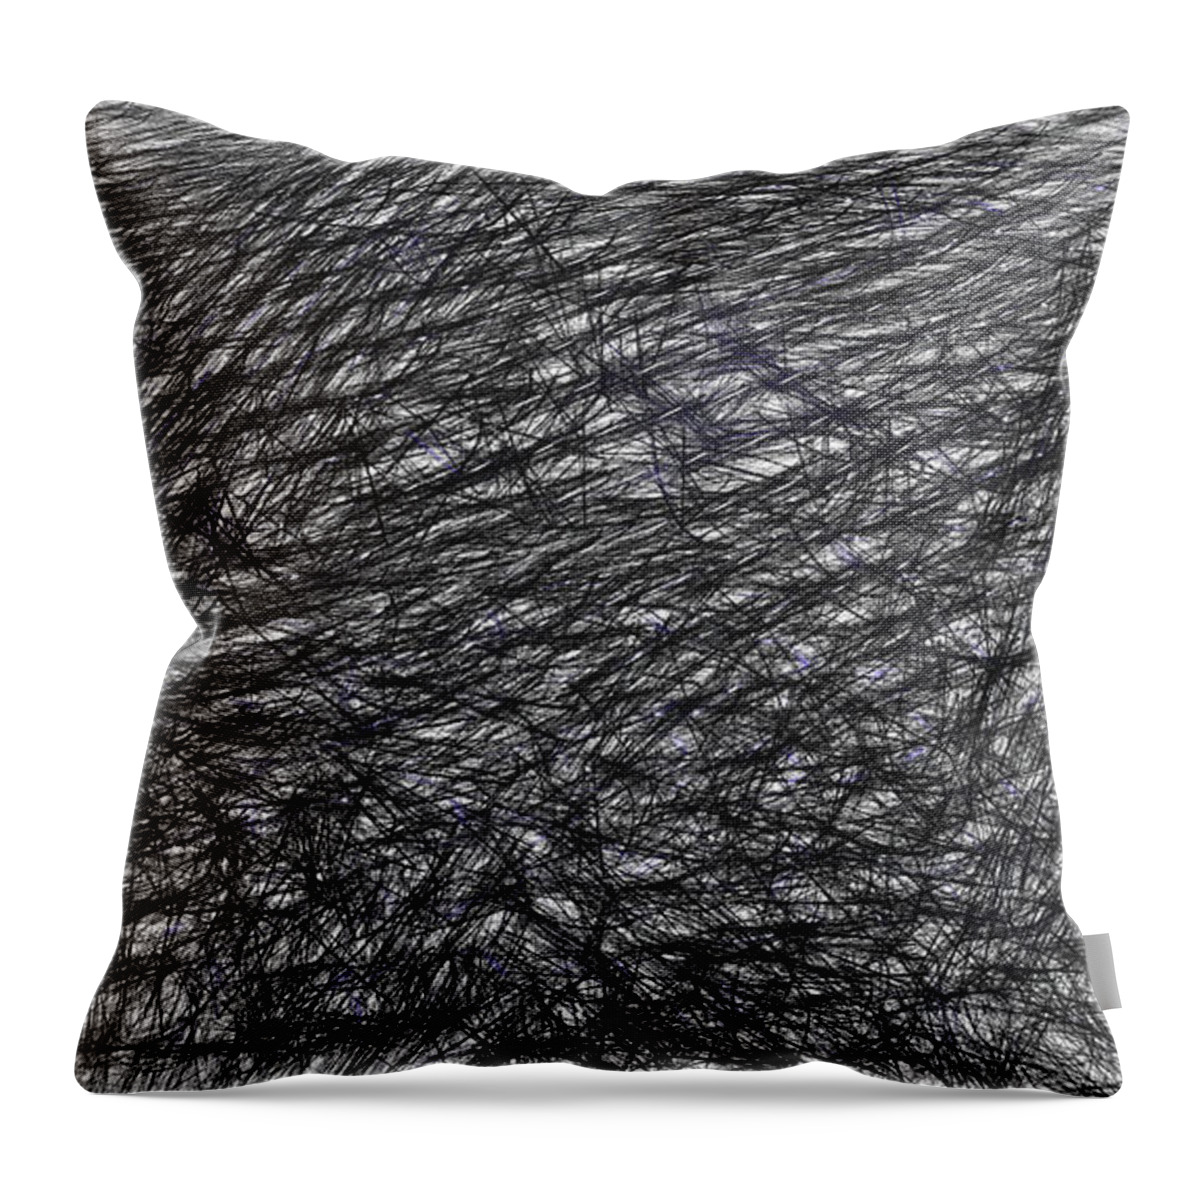 Monochrome Throw Pillow featuring the digital art Strategic planning by Jeff Iverson